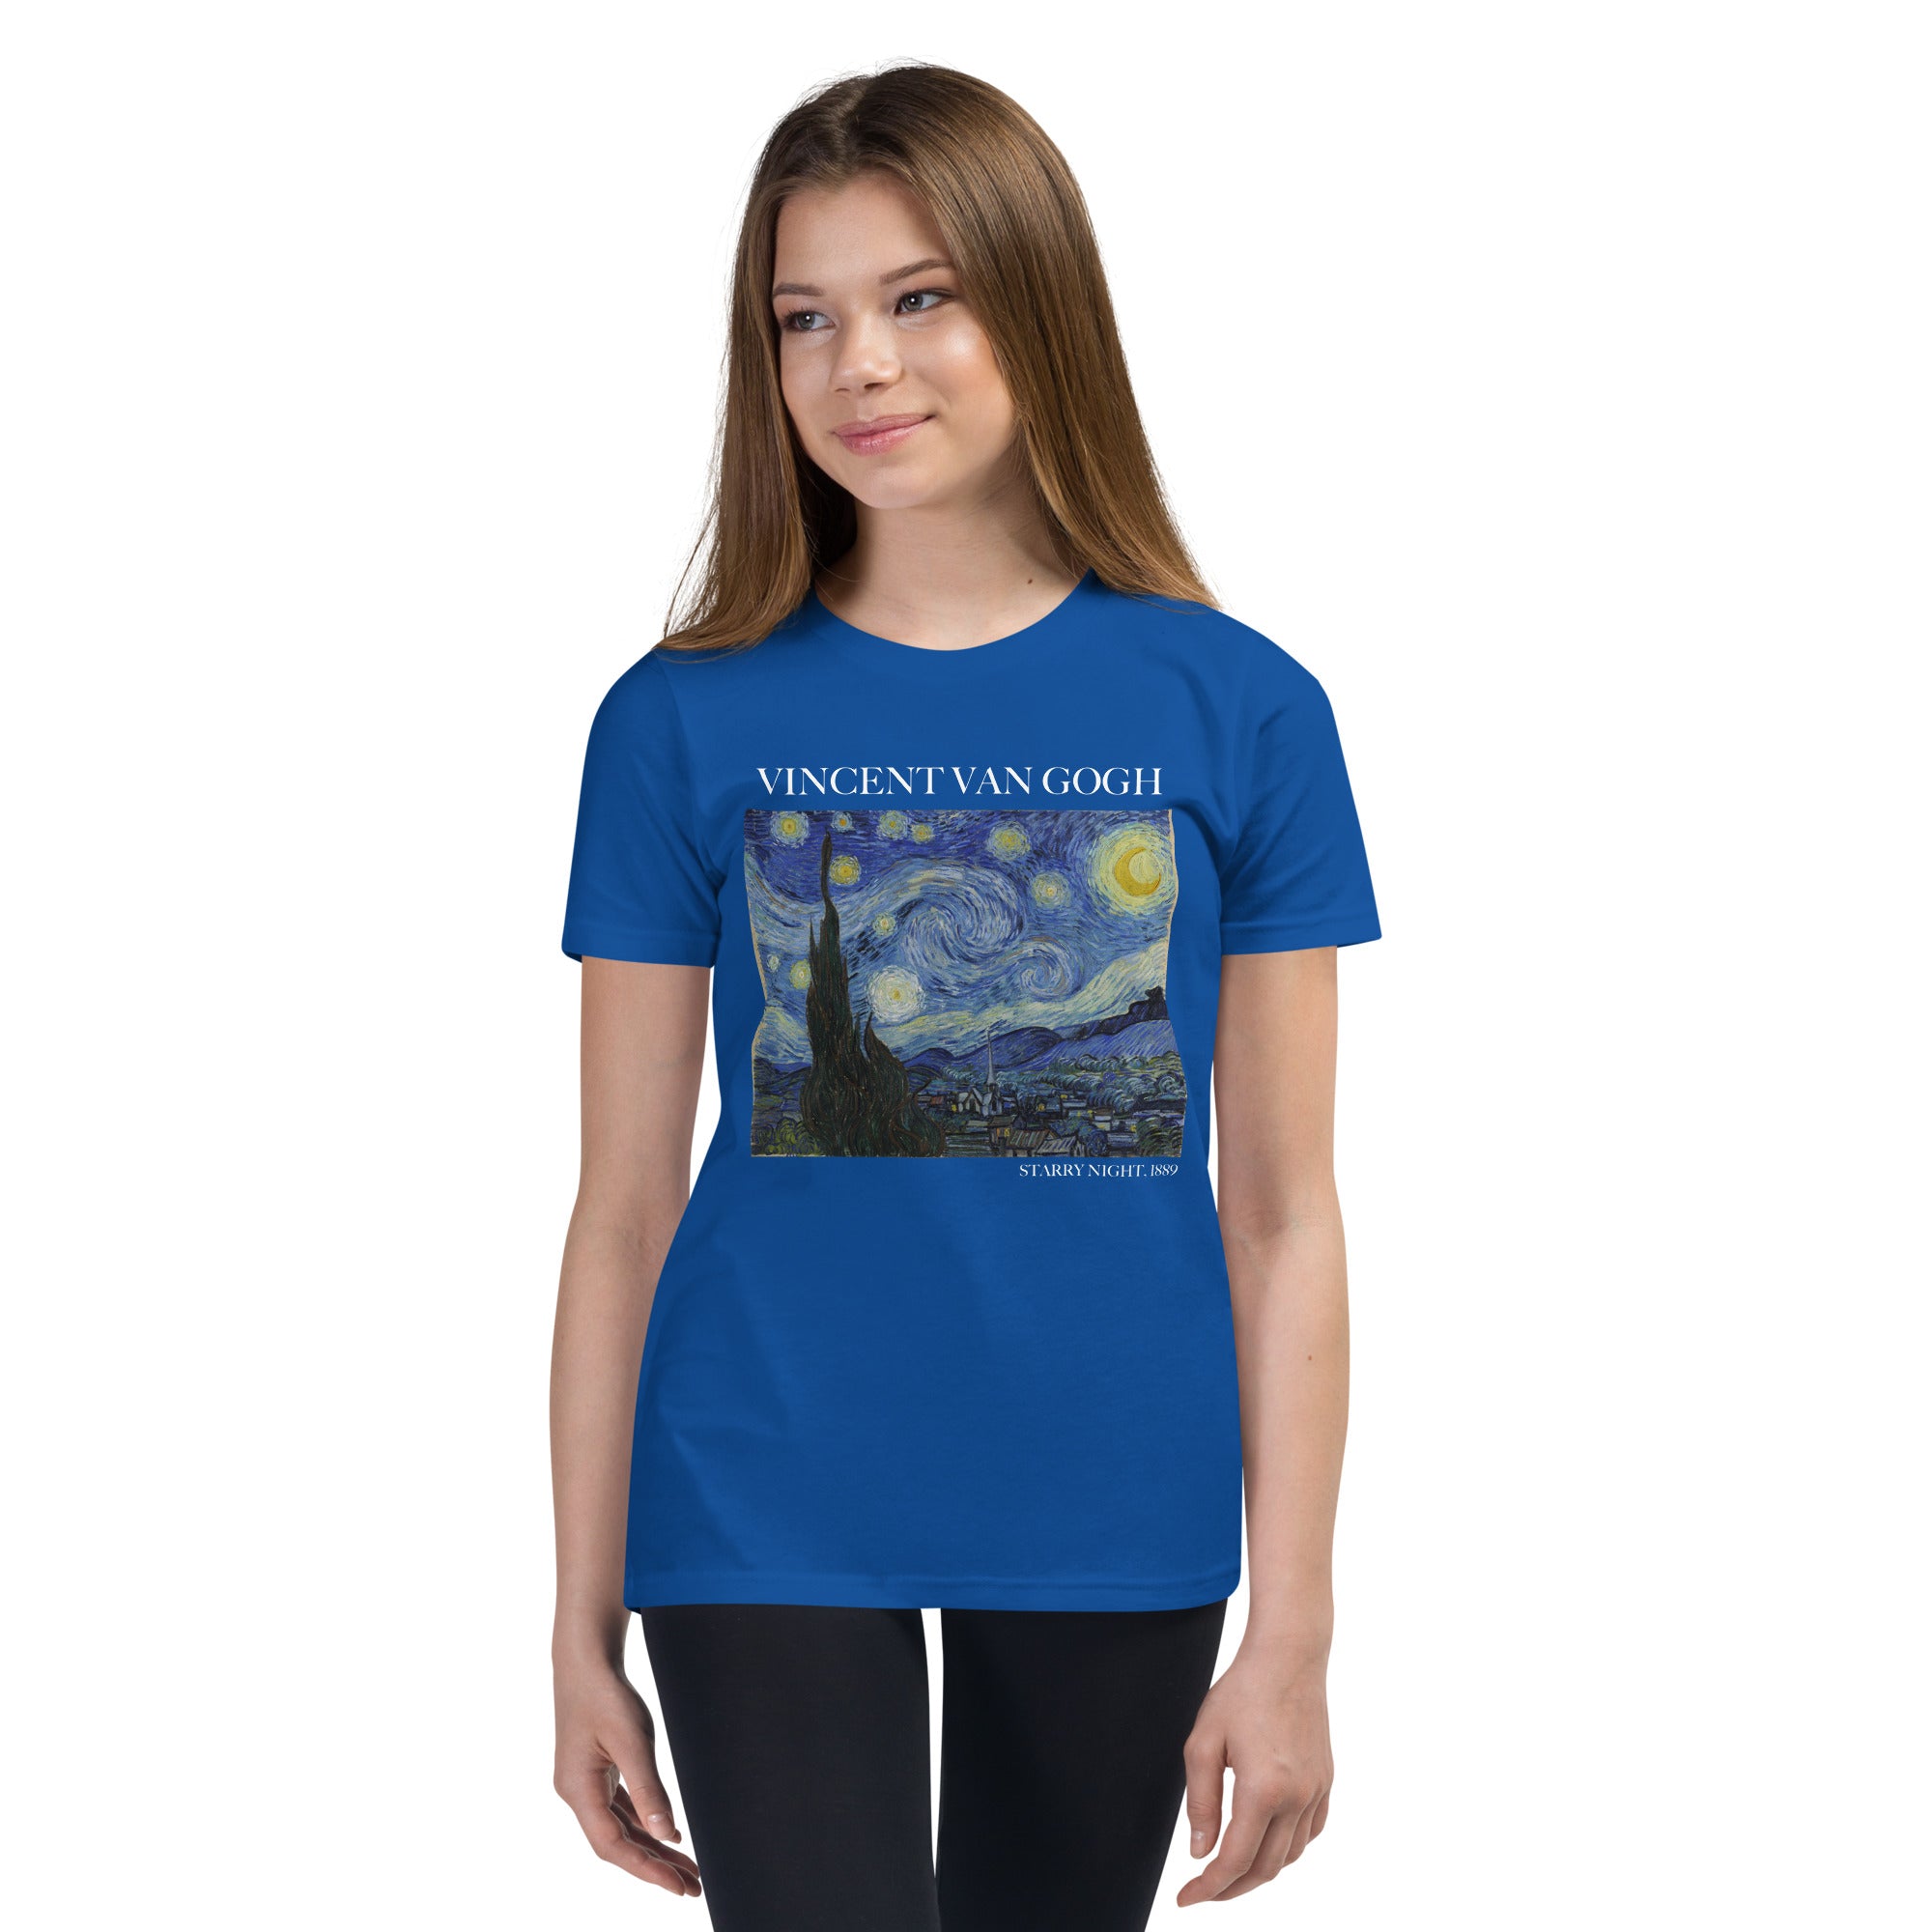 Vincent van Gogh 'Starry Night' Famous Painting Short Sleeve T-Shirt | Premium Youth Art Tee